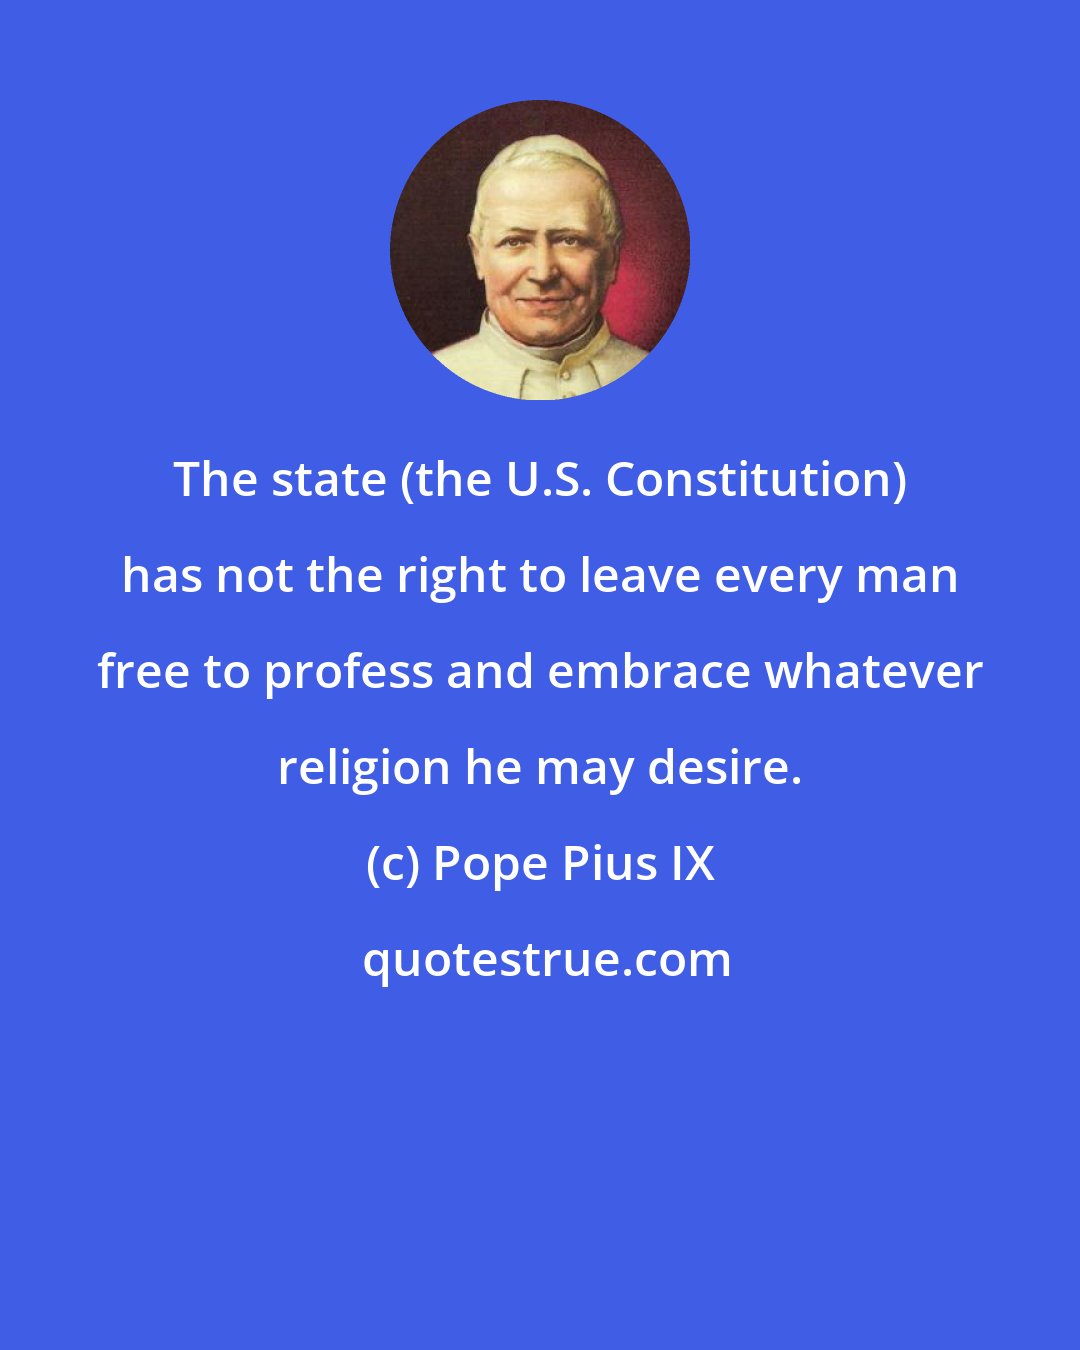 Pope Pius IX: The state (the U.S. Constitution) has not the right to leave every man free to profess and embrace whatever religion he may desire.